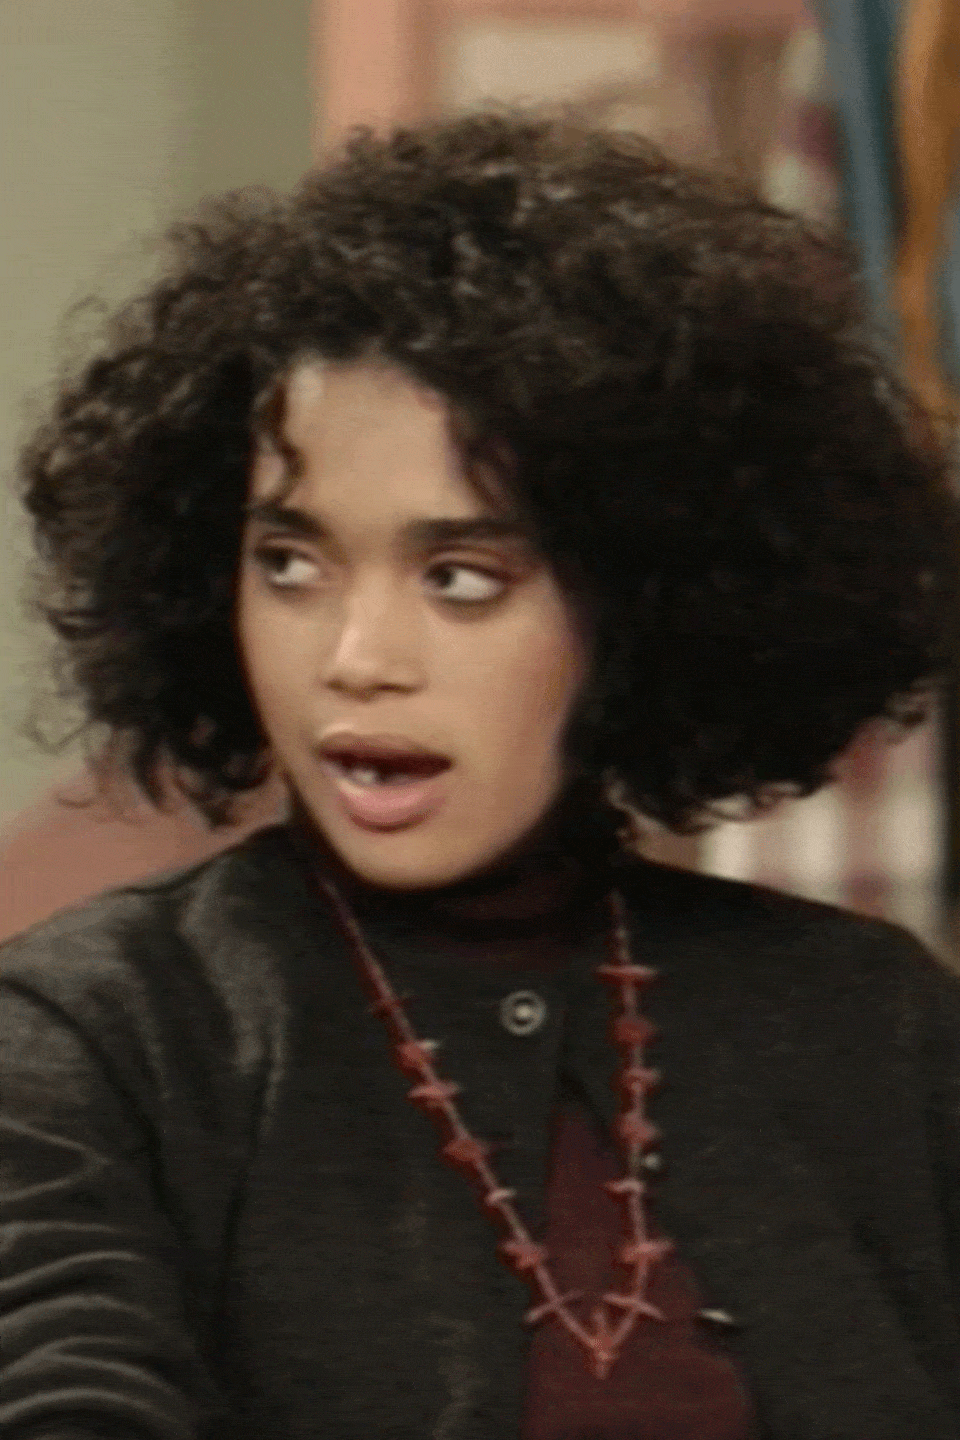 <p>In 1984 <em>The Cosby Show </em>premiered with Bonet as Denise Huxtable, the daughter with amazing fashion sense.</p>